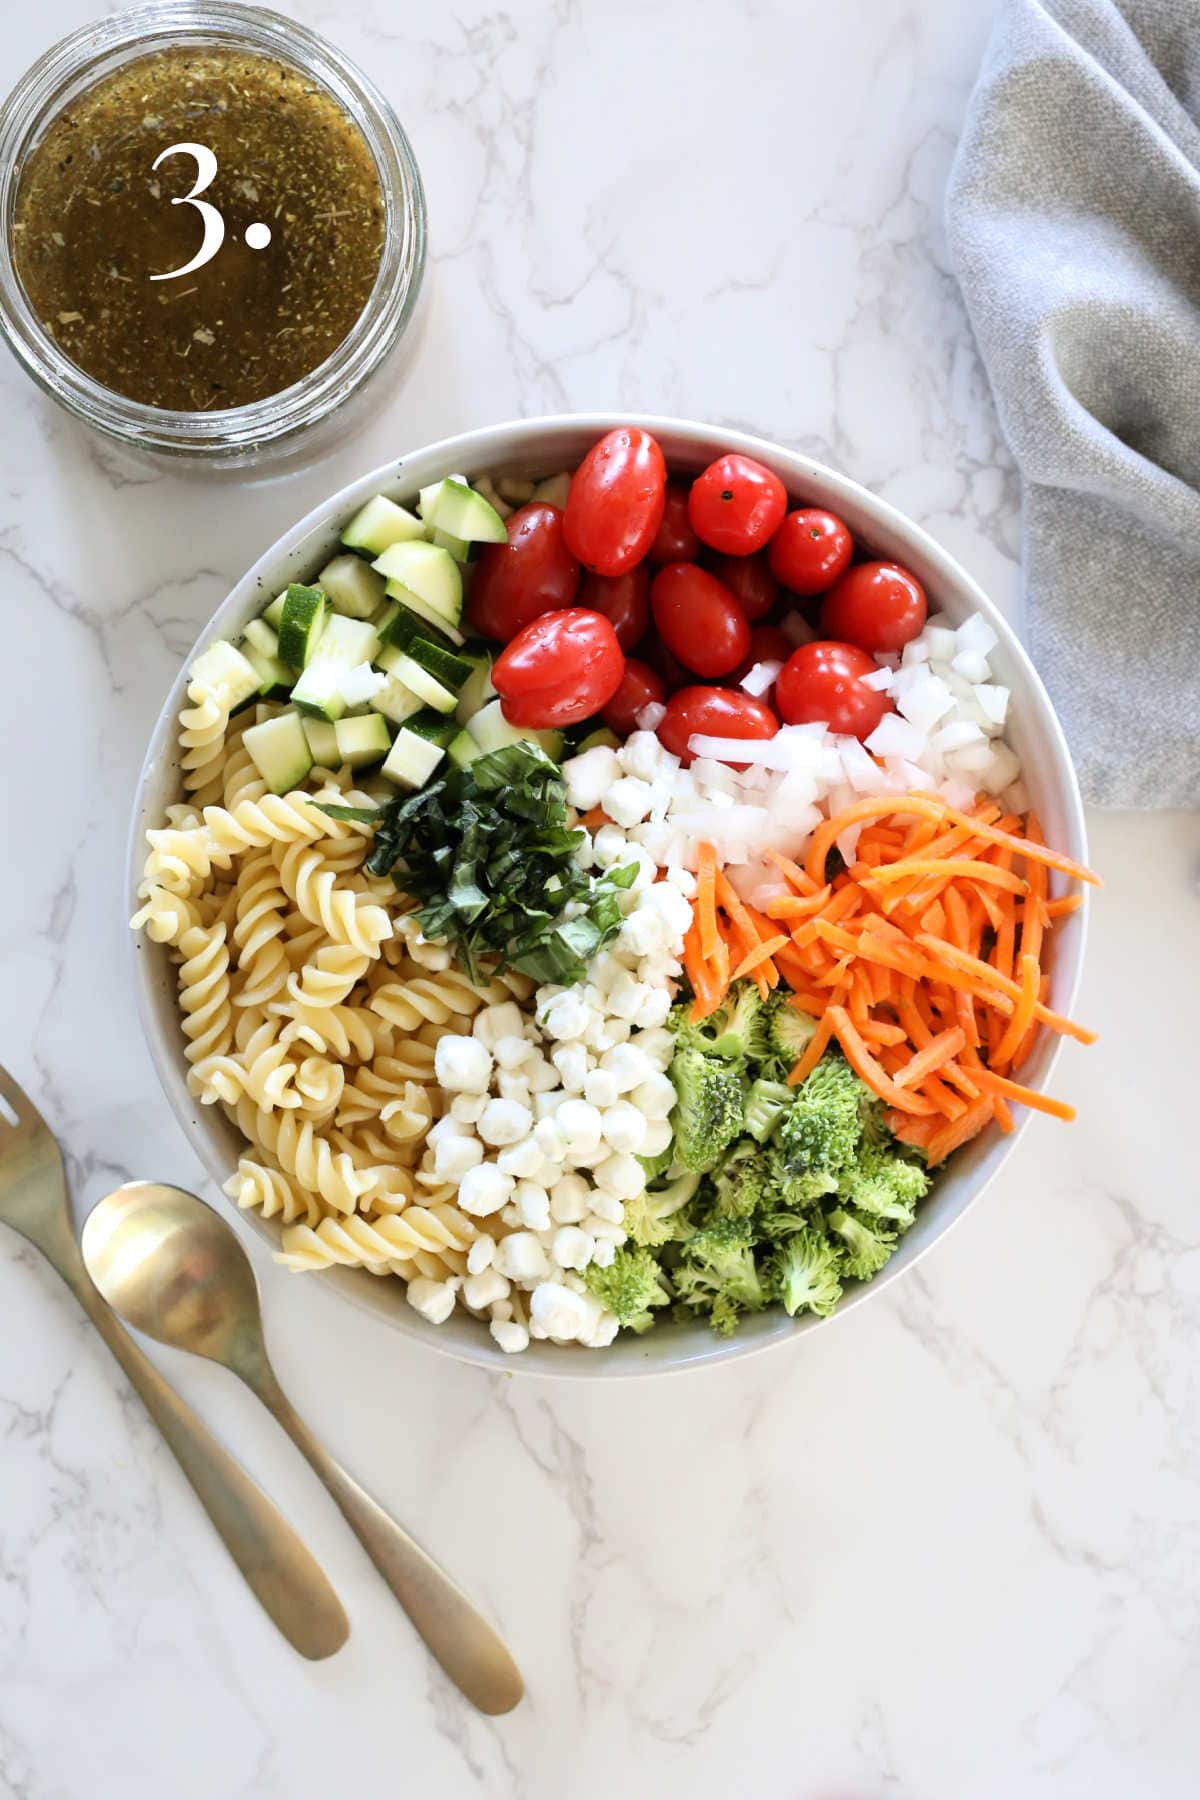 Pasta salad ingredients in a salad bowl with silverware and Italian dressing.